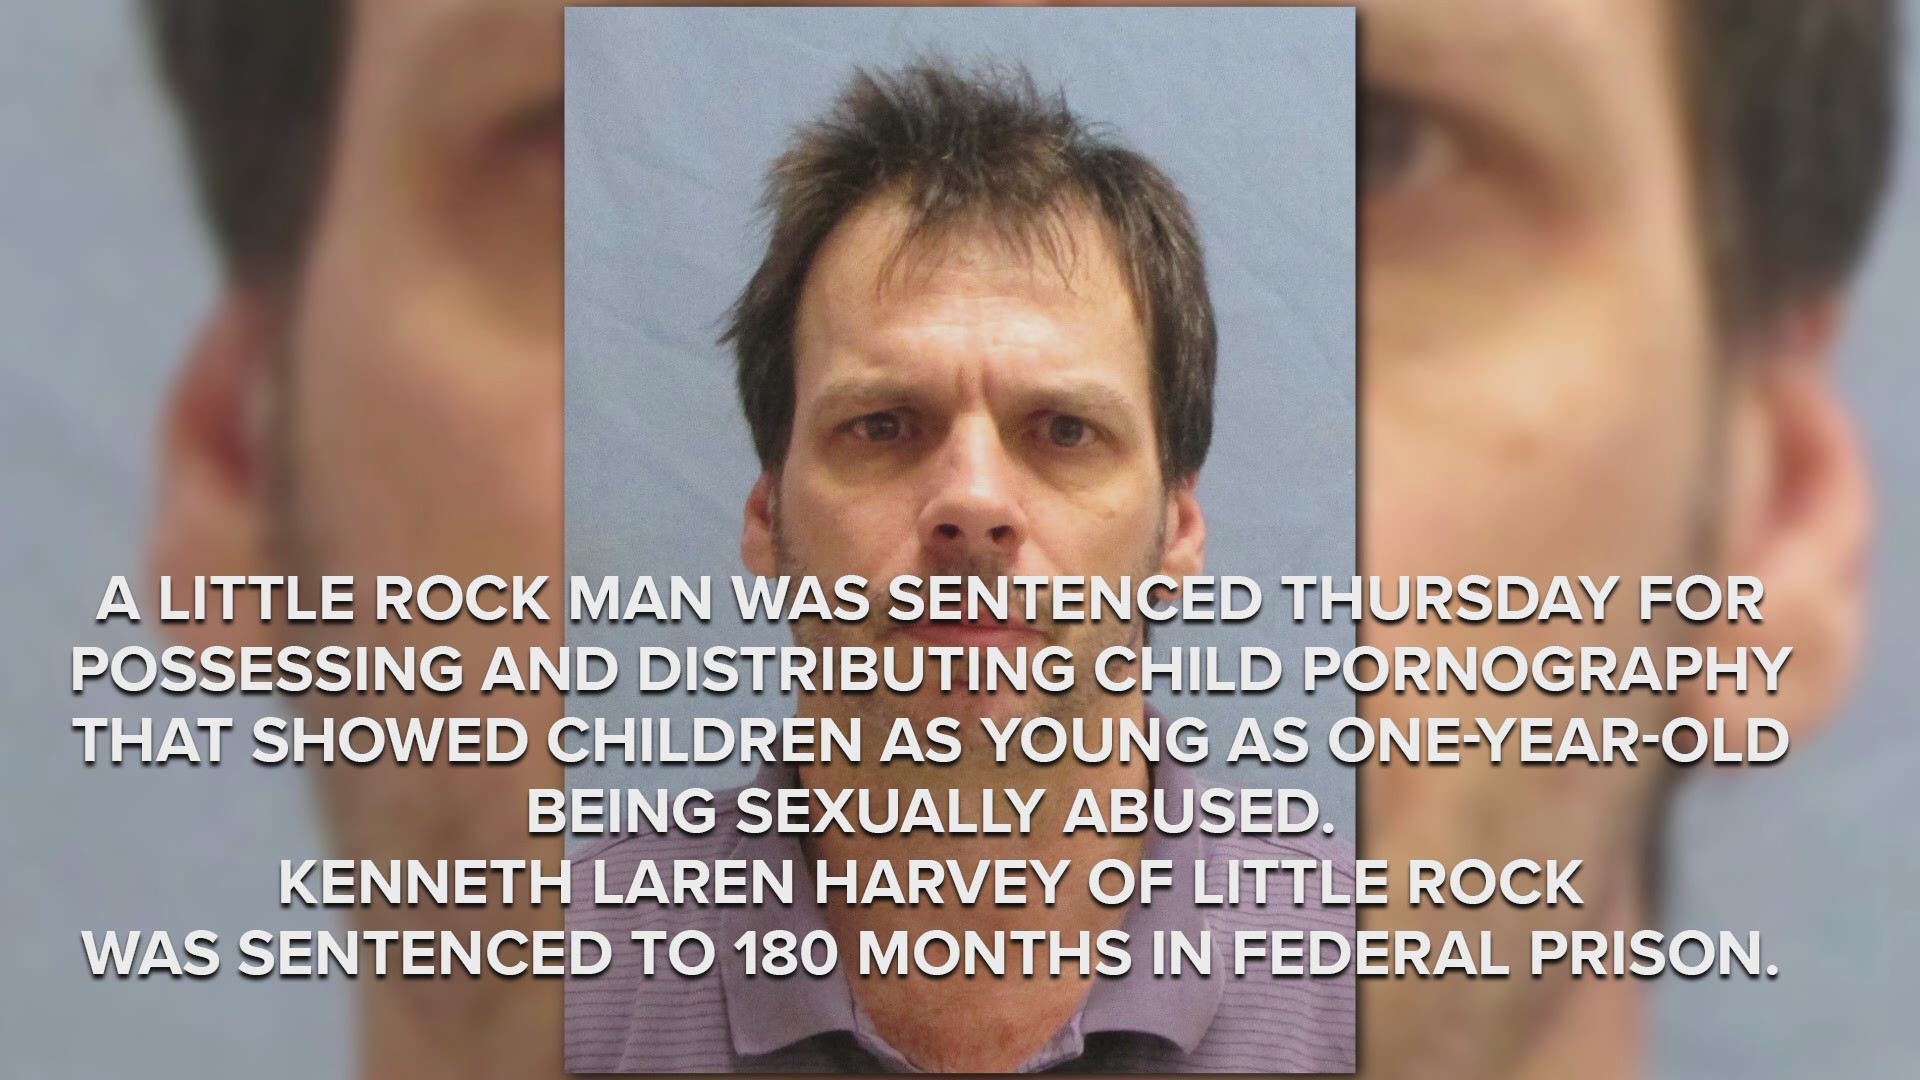 A Little Rock man was sentenced Thursday for possessing and distributing child pornography that showed children as young as one year old being
sexually abused. Kenneth Laren Harvey of Little Rock was sentenced to 180 months
in federal prison.